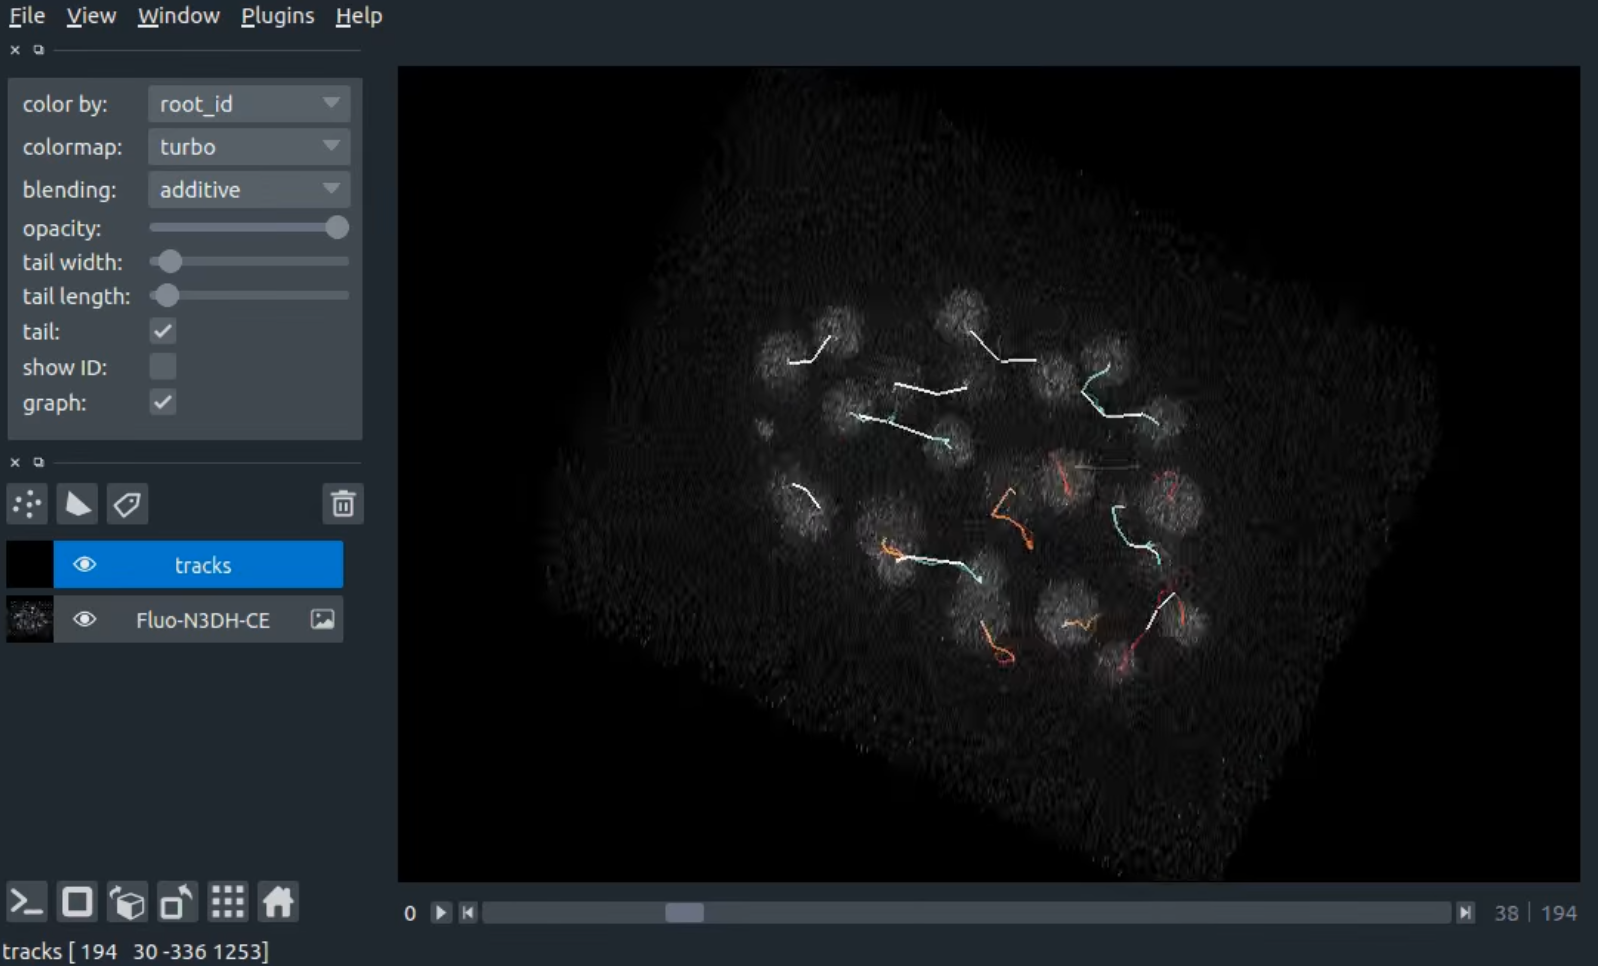 napari viewer with fluorescence imaging cells image layer and tracks layer loaded. The dimension slider under the canvas is at 0.